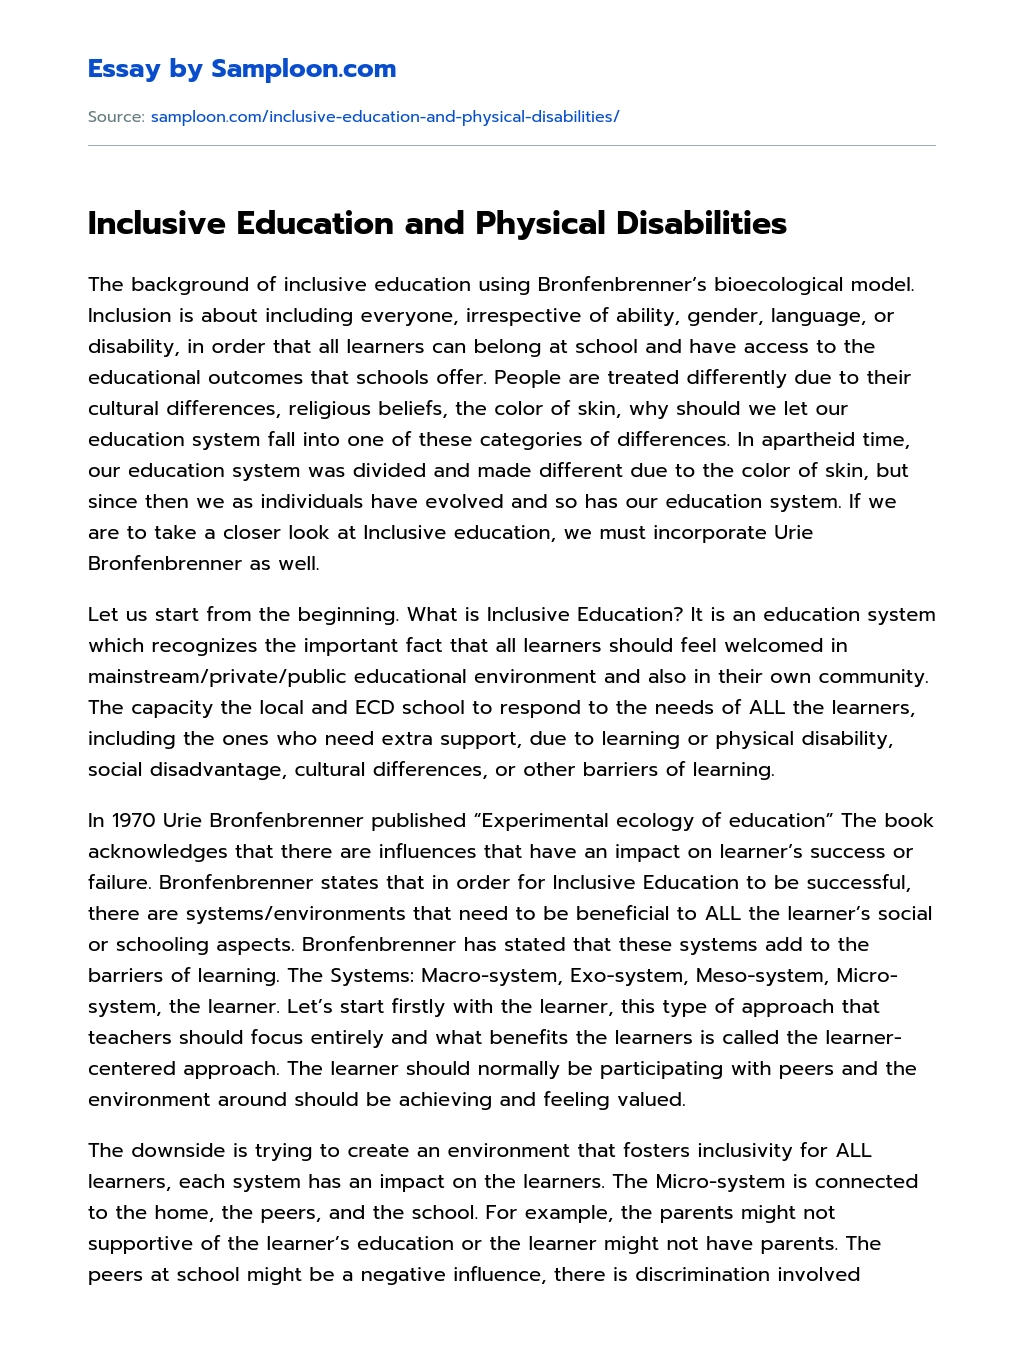 Inclusive Education and Physical Disabilities essay